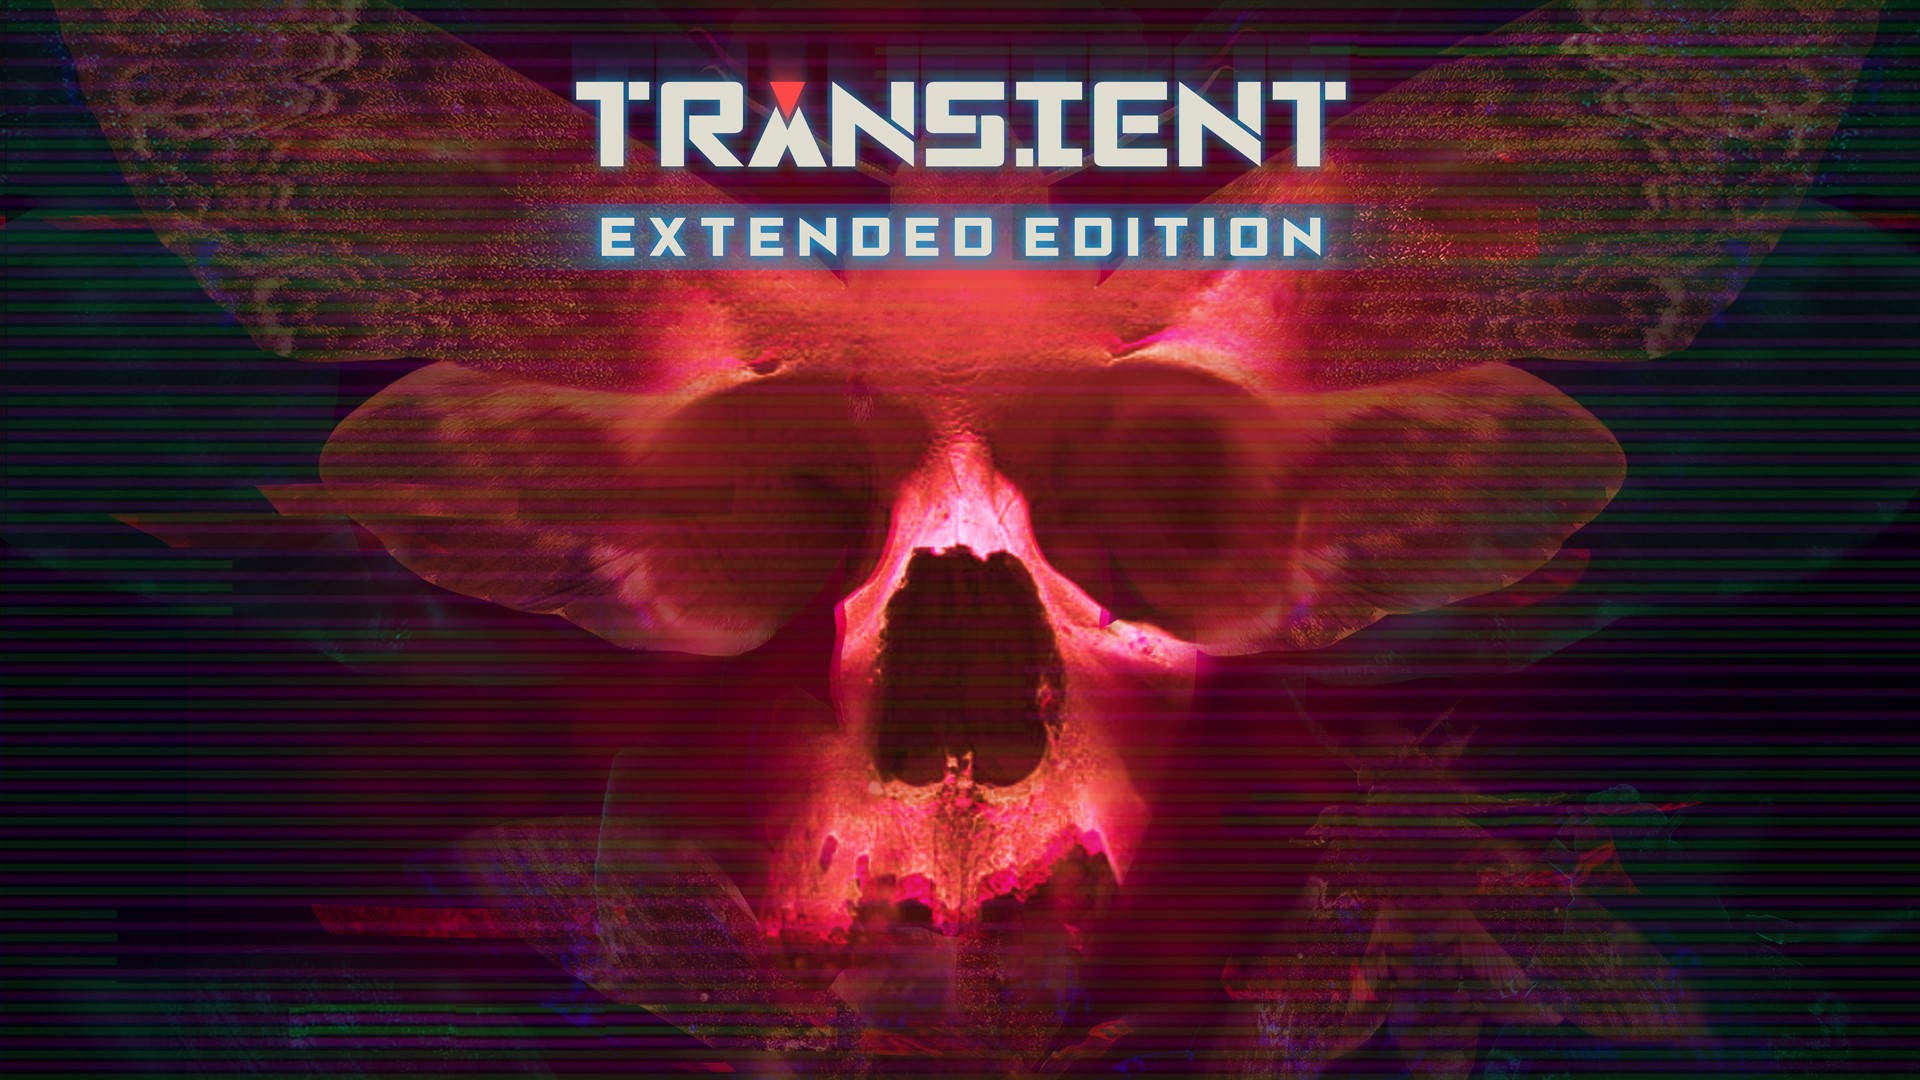 TEST Transient Extended Edition XWFR